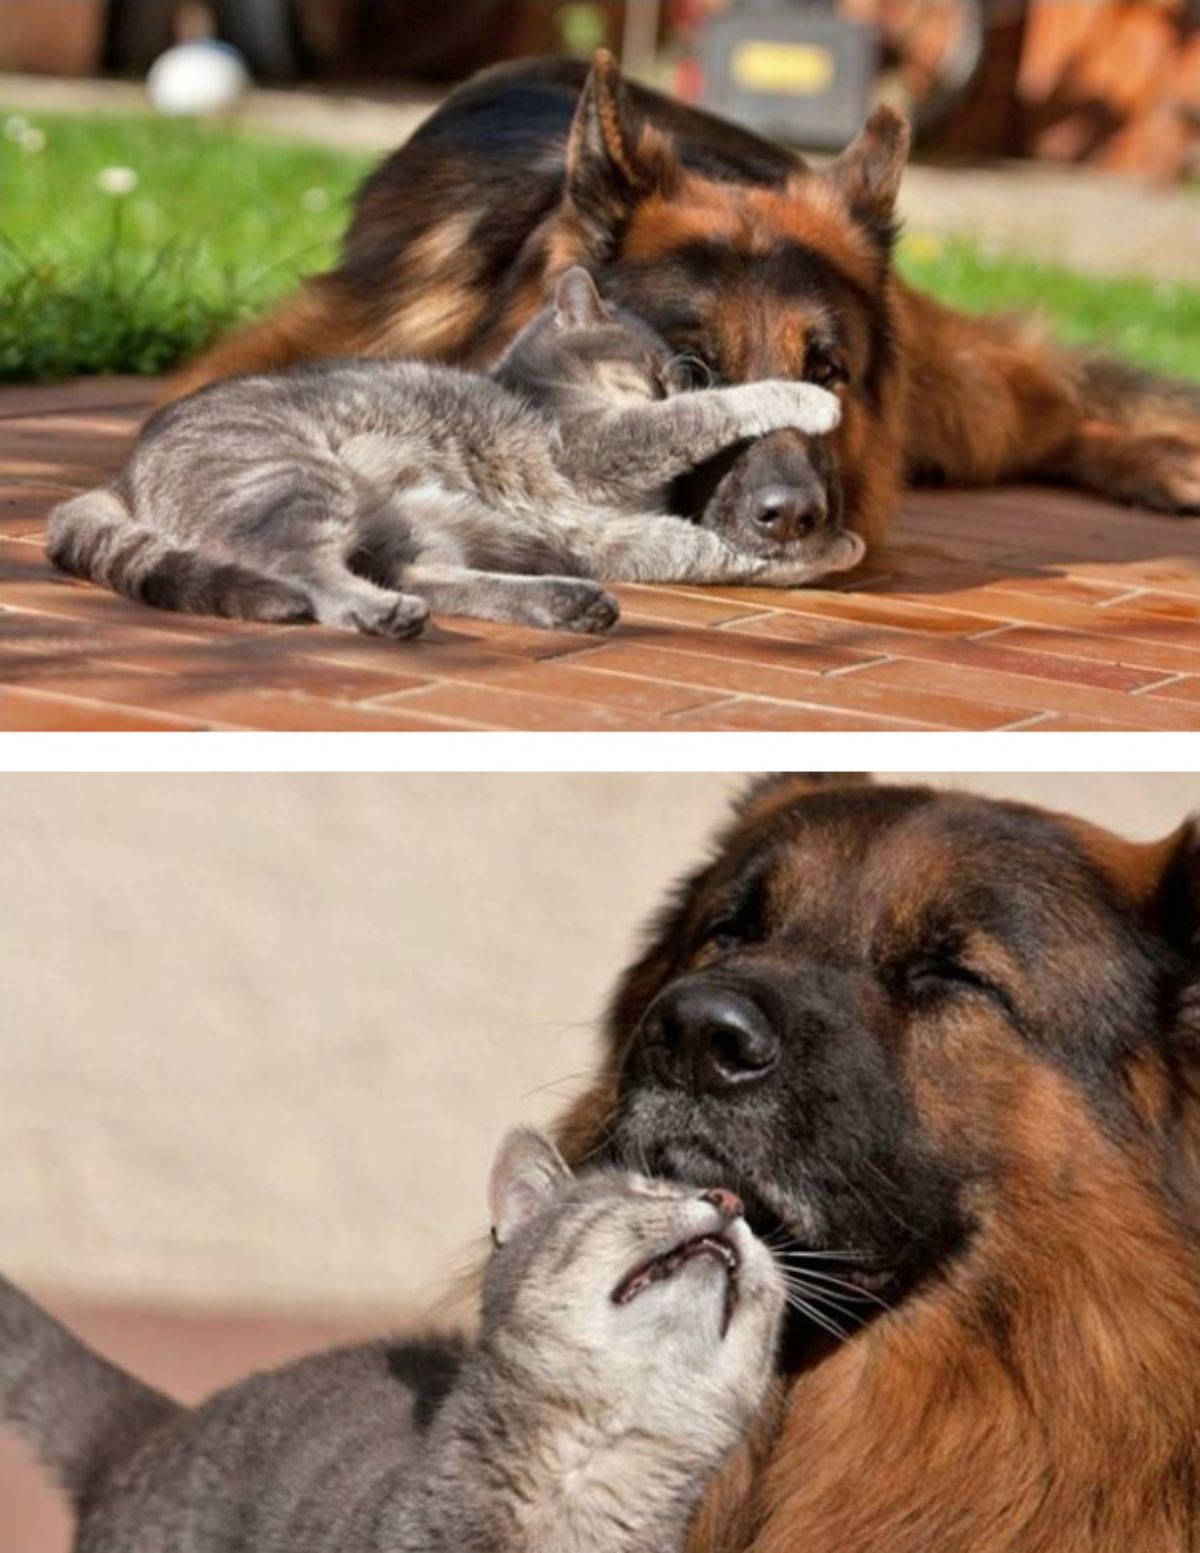 1 photo of a grey tabby cat holding a german shepherd's nose and 1 photo of the cat nuzzling the dog's chin